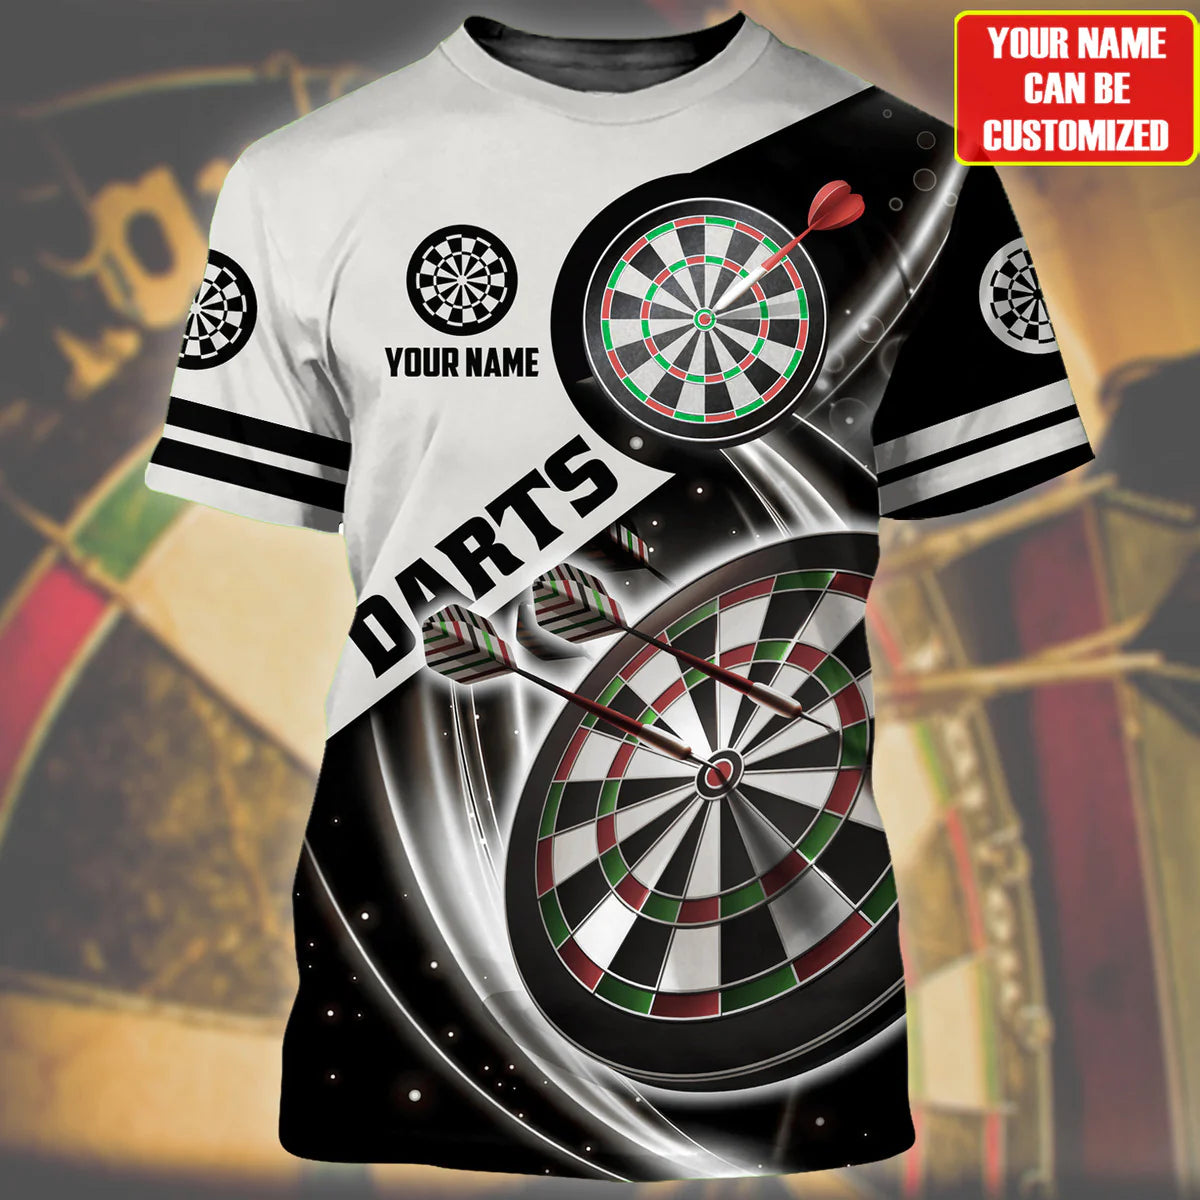 Personalized Darts All Over Printed Unisex Shirt, Darts love gifts, Present to Darts player – DT046